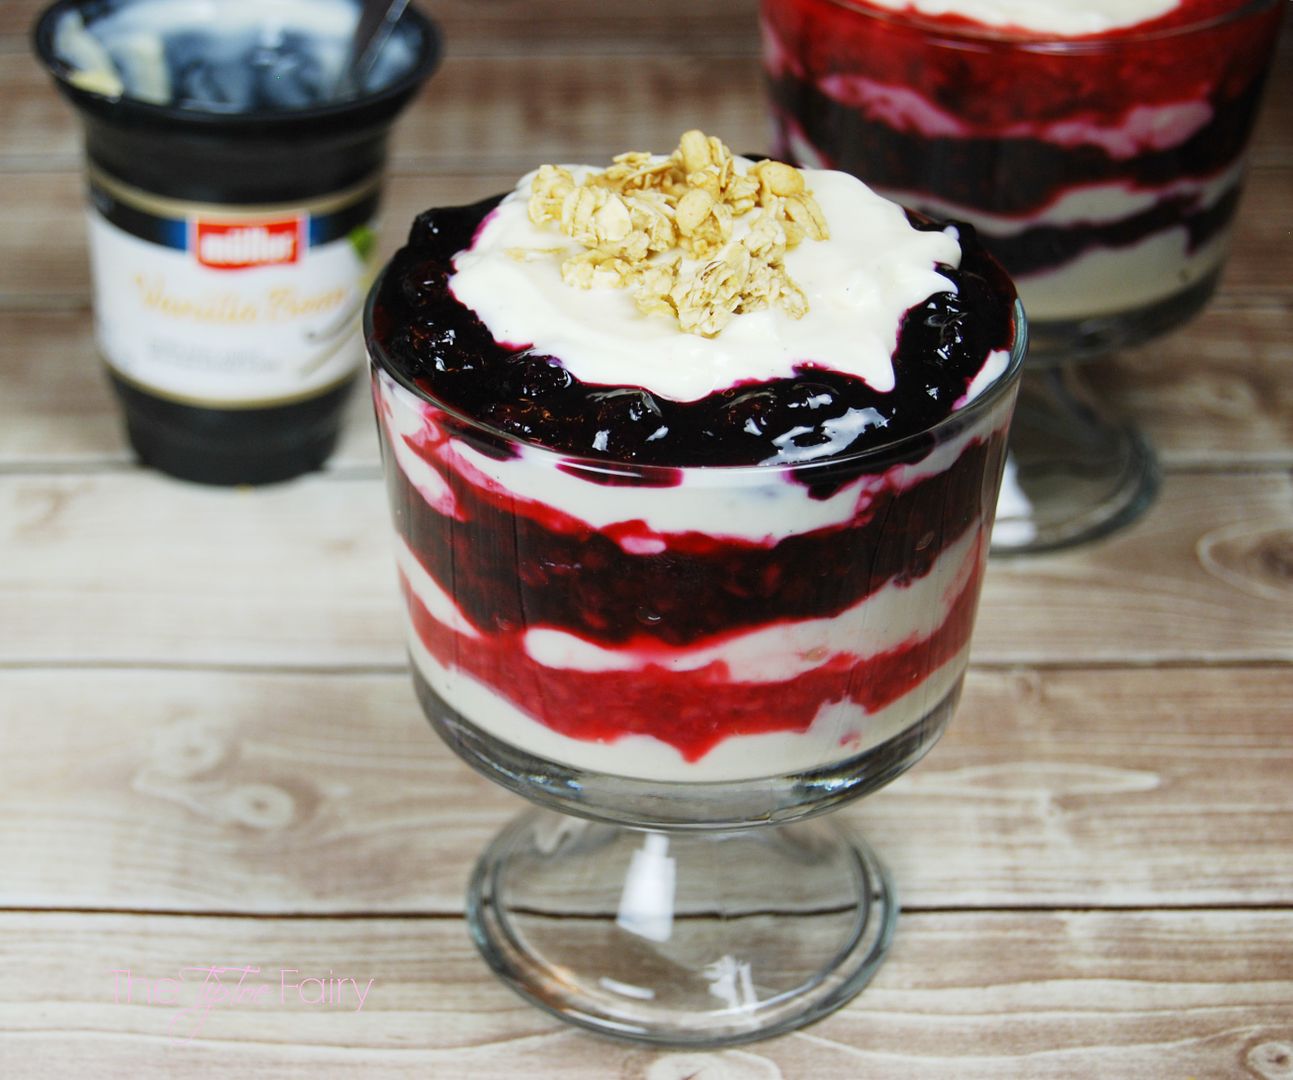 Fresh Berry Yogurt Parfait - make fresh berry compote and layer it with Müller® Ice Cream Inspired Yogurt for an indulgent treat without the guilt | The TipToe Fairy #MullerMoment #ad #parfait